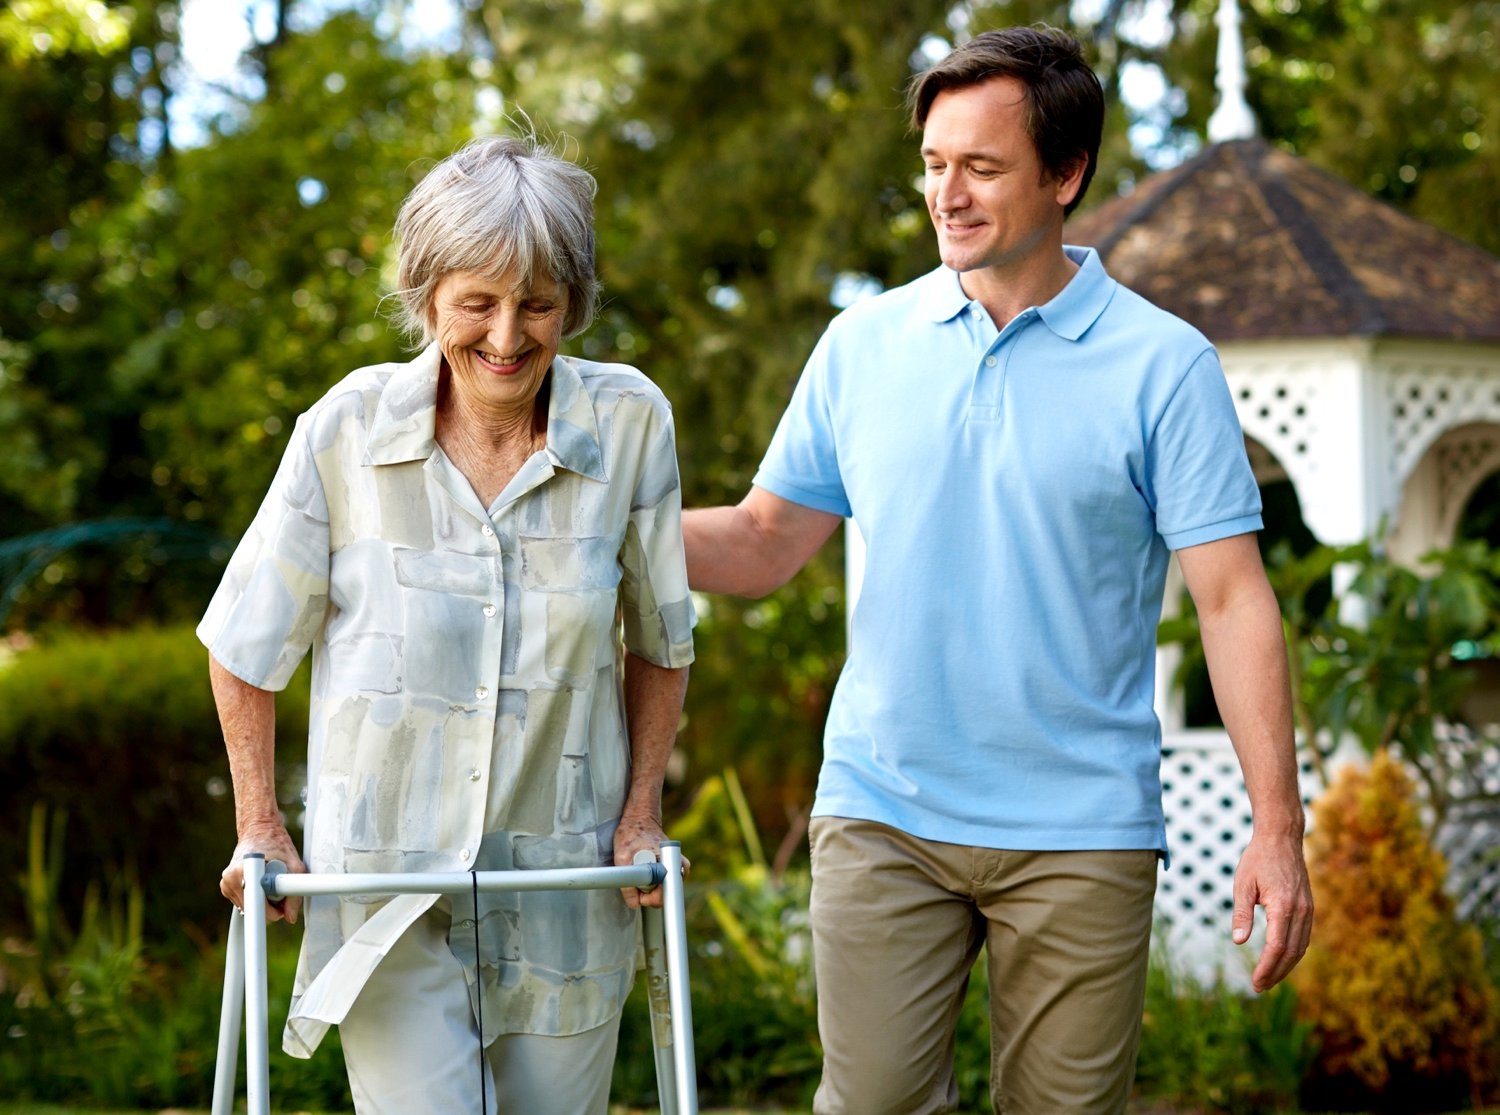 A team member helping a senior woman with a walker in the garden